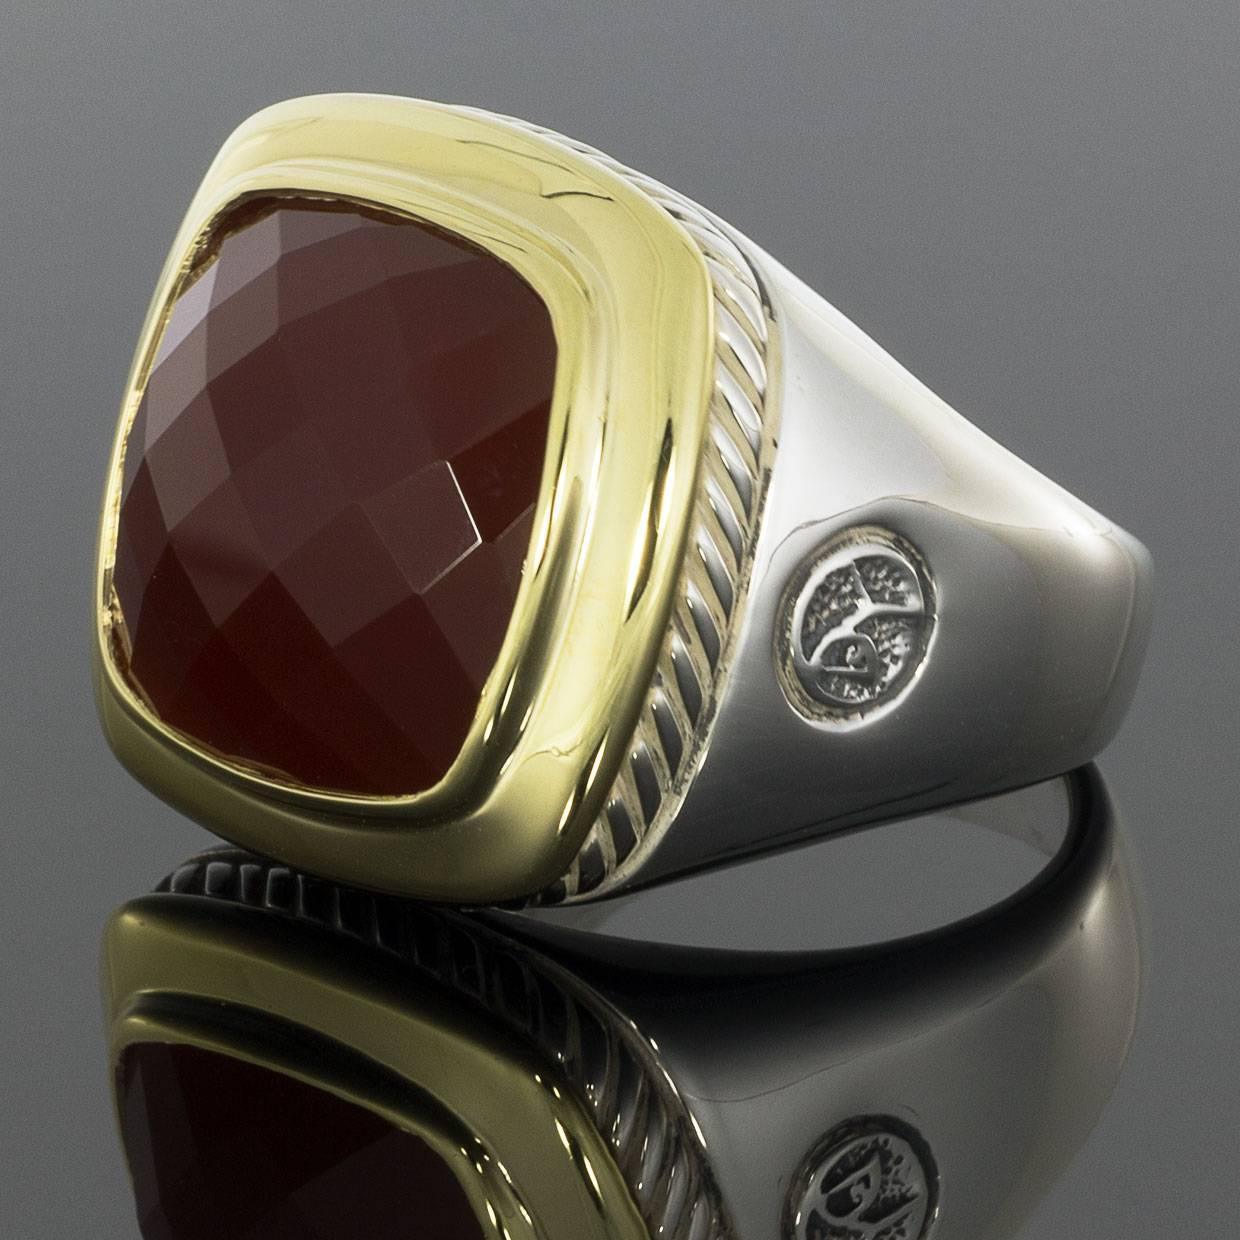 This beautiful David Yurman ring is from the Albion Collection and features a checkerboard faceted cushion cut carnelian gemstone.  The center stone is 15 x 15 mm.The ring is made of sterling silver and 18 karat yellow gold with a high polished